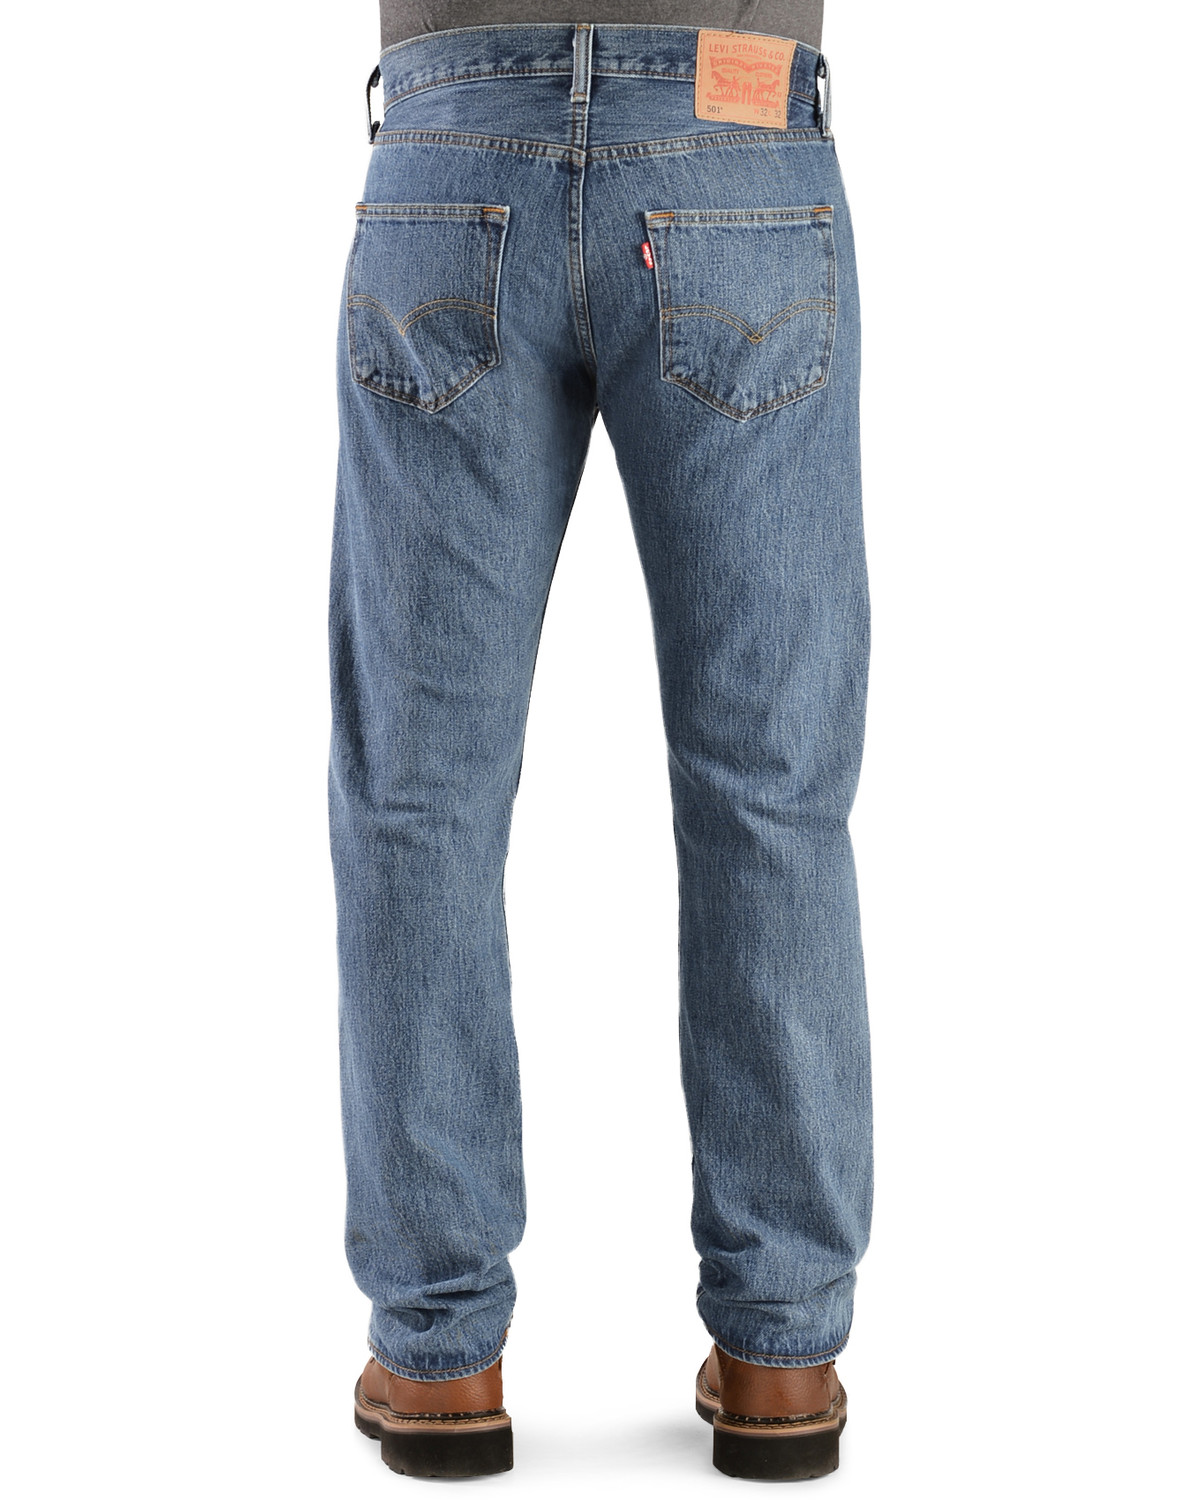 Levi's 501 Jeans - Original Prewashed - Country Outfitter